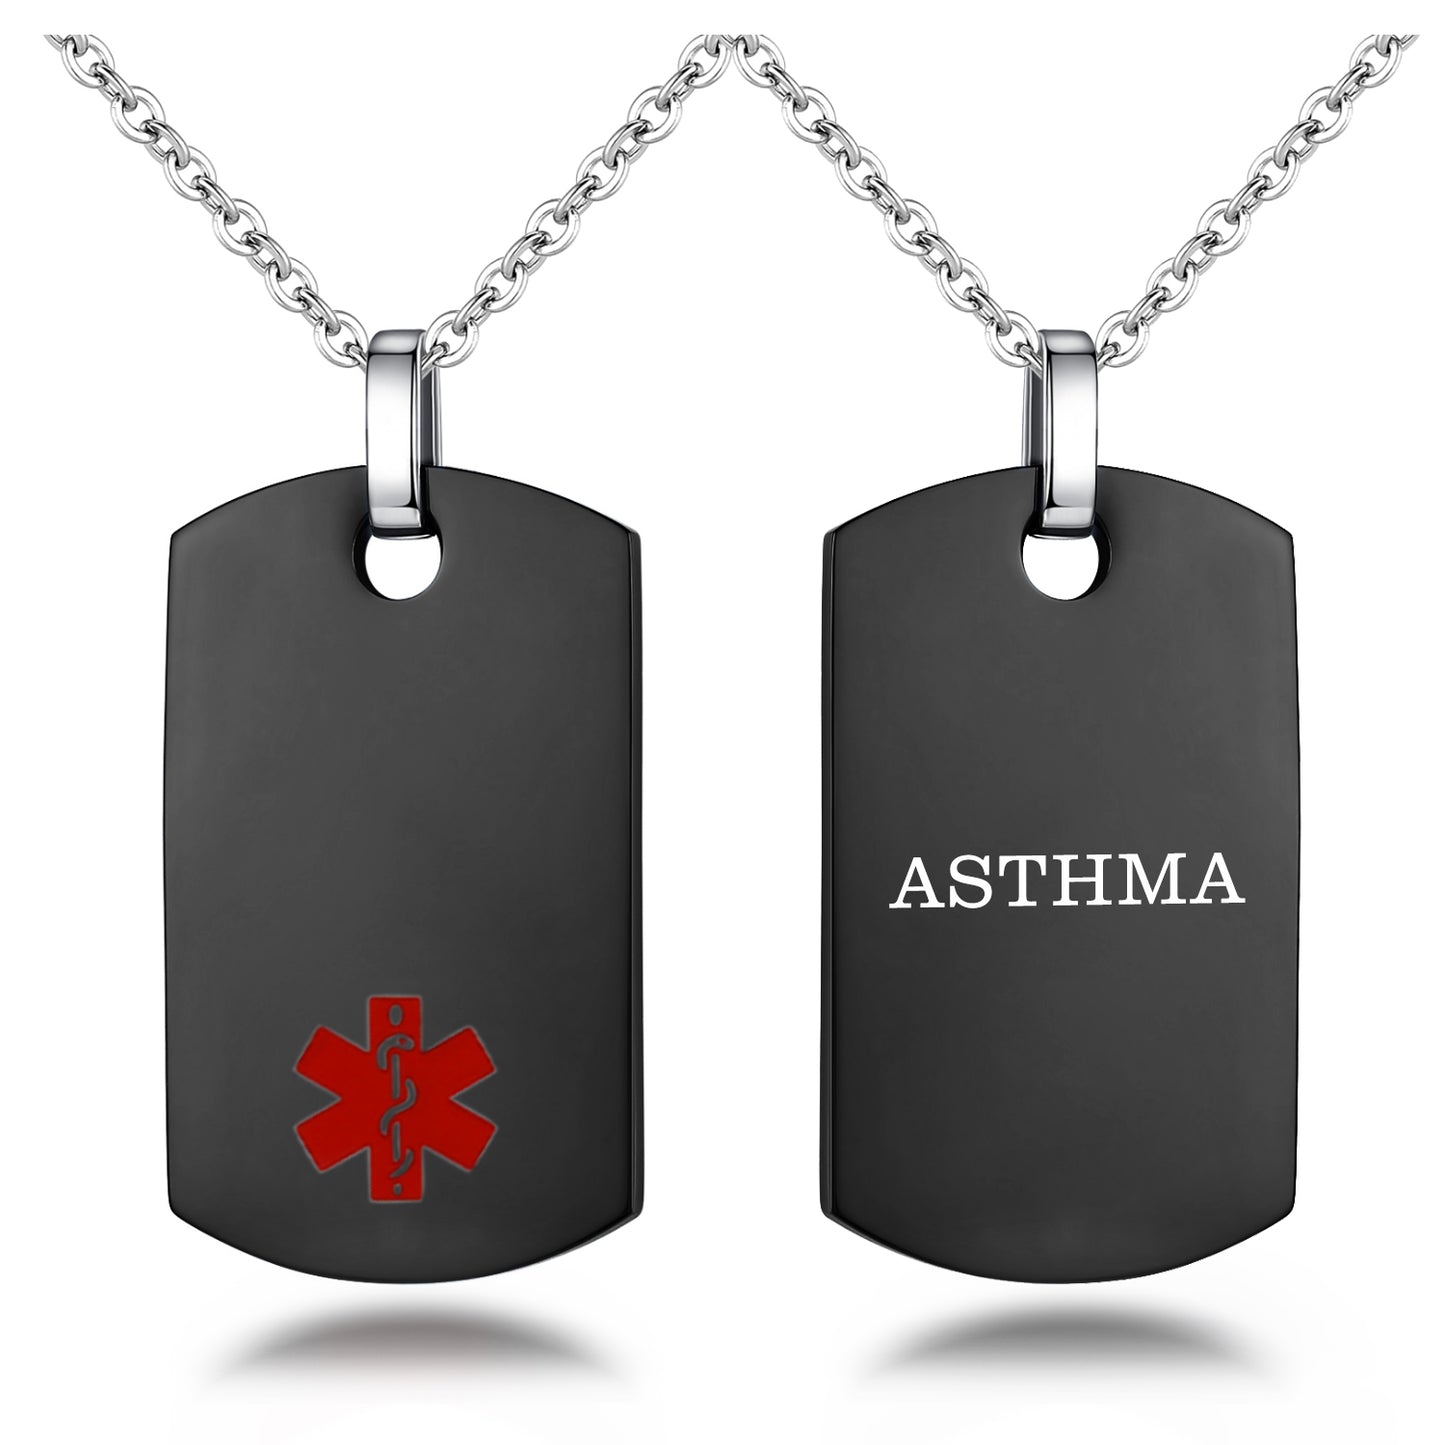 Stainless steel medical alert necklace for men black dog tags identity pendants with 24" chain